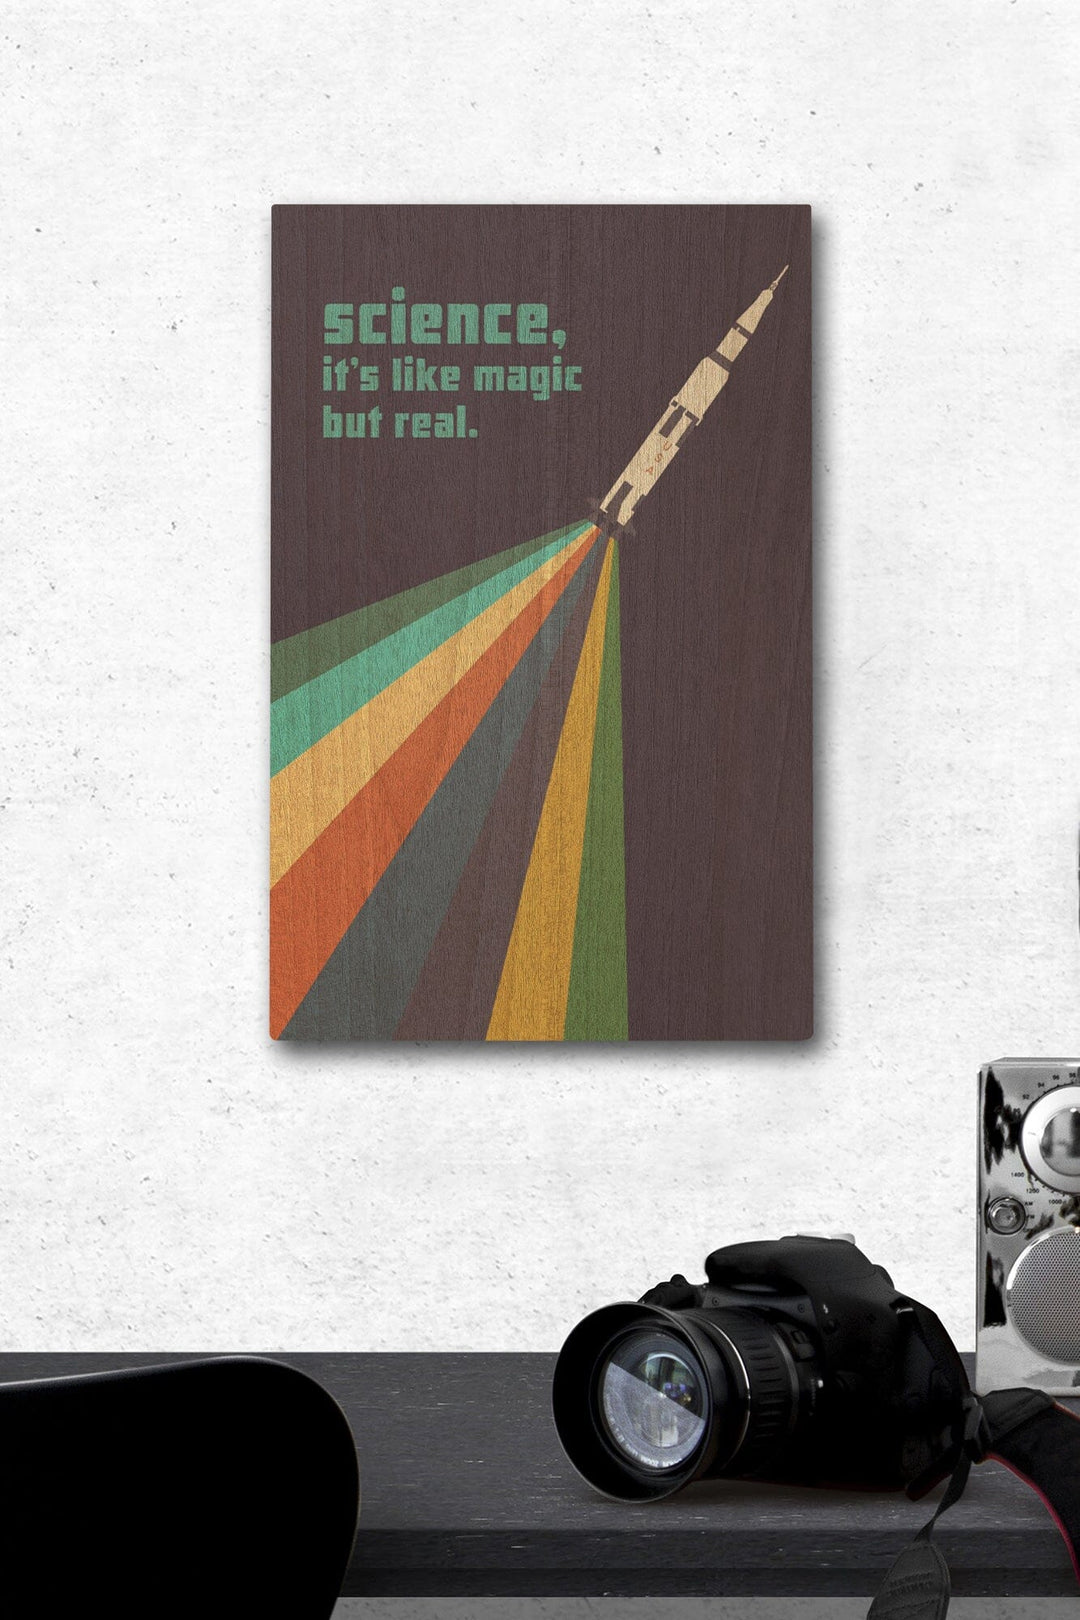 Space Is The Place Collection, Rainbow Rocket, Science It's Like Magic But Real, Wood Signs and Postcards Wood Lantern Press 12 x 18 Wood Gallery Print 